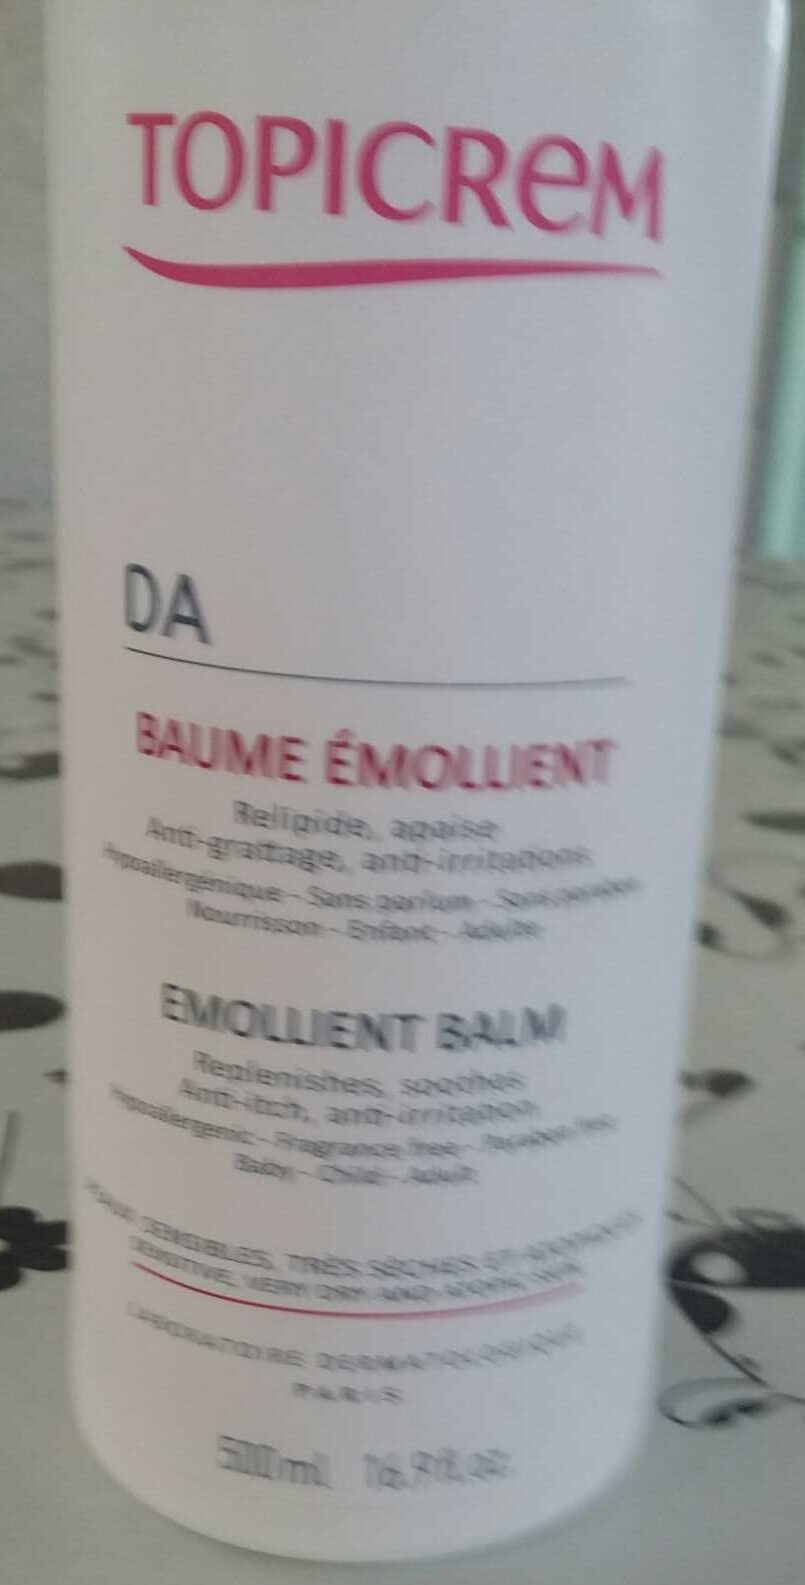 Beaume emollient - Product - fr